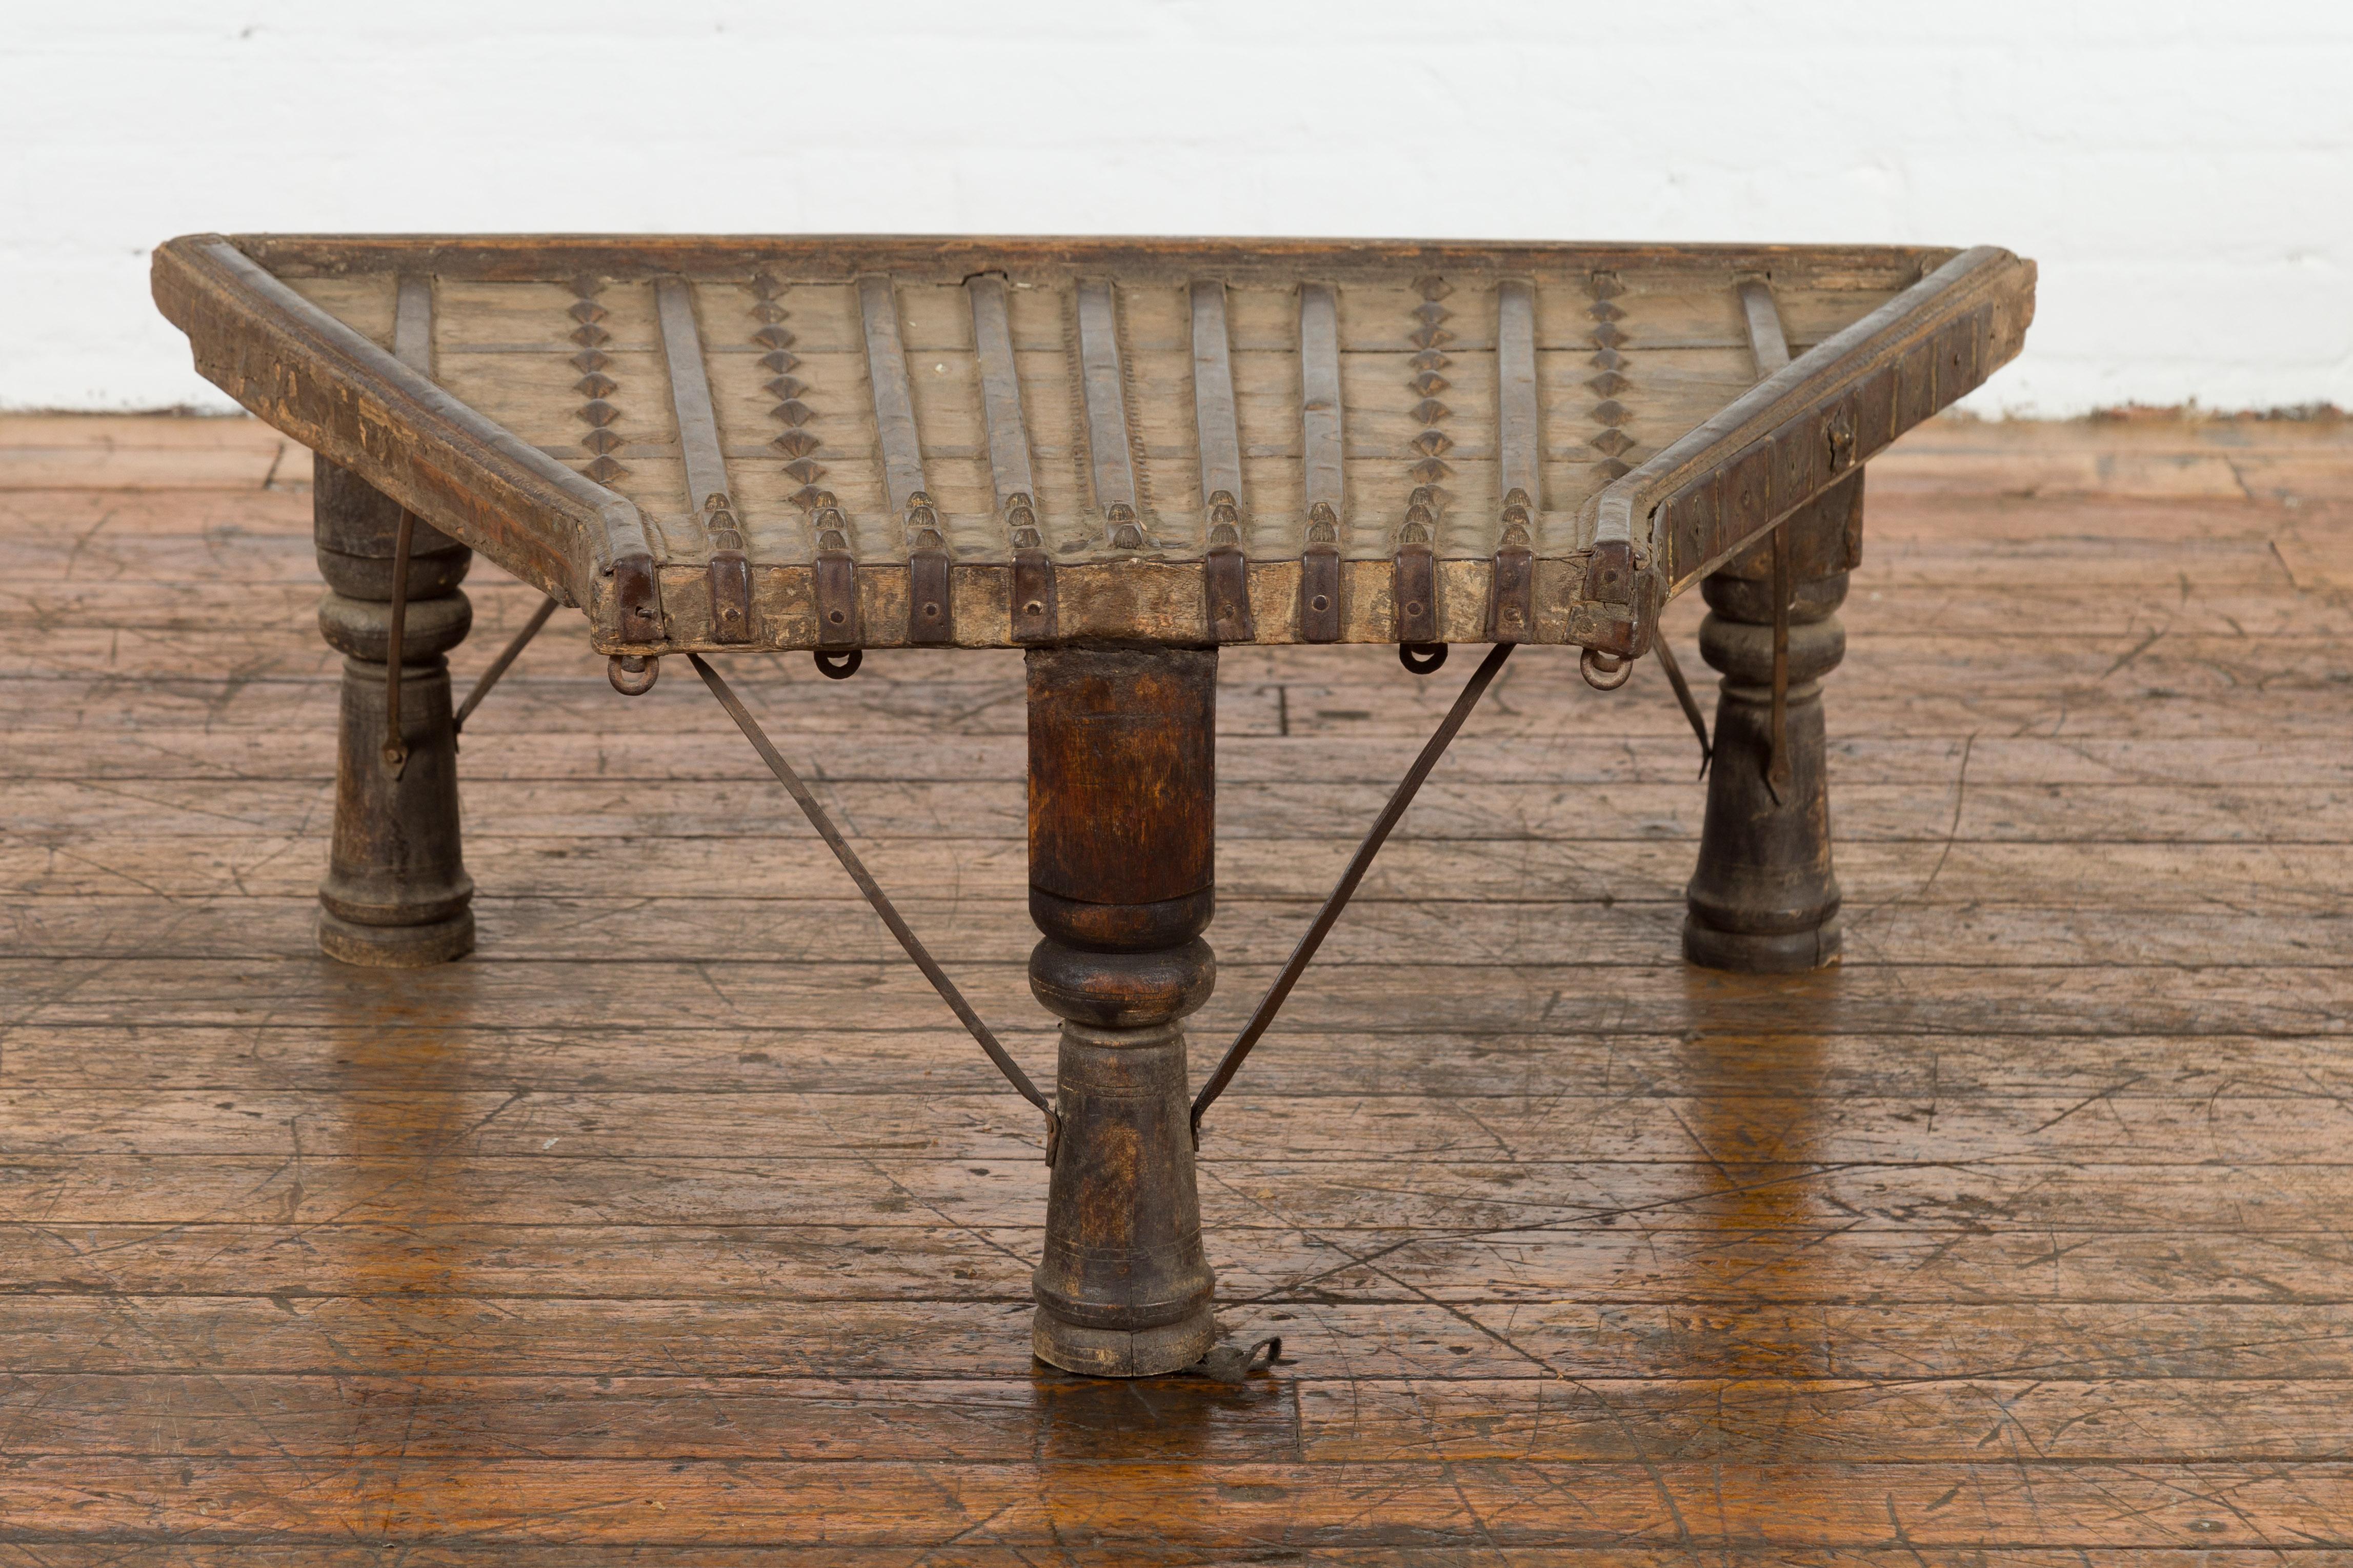 An antique rustic Indian handmade coffee table from the 19th century with trapezoidal top, iron stretchers, turned baluster legs and weathered patina. Created in India during the 19th century, this piece is made of the front portion of a bullock